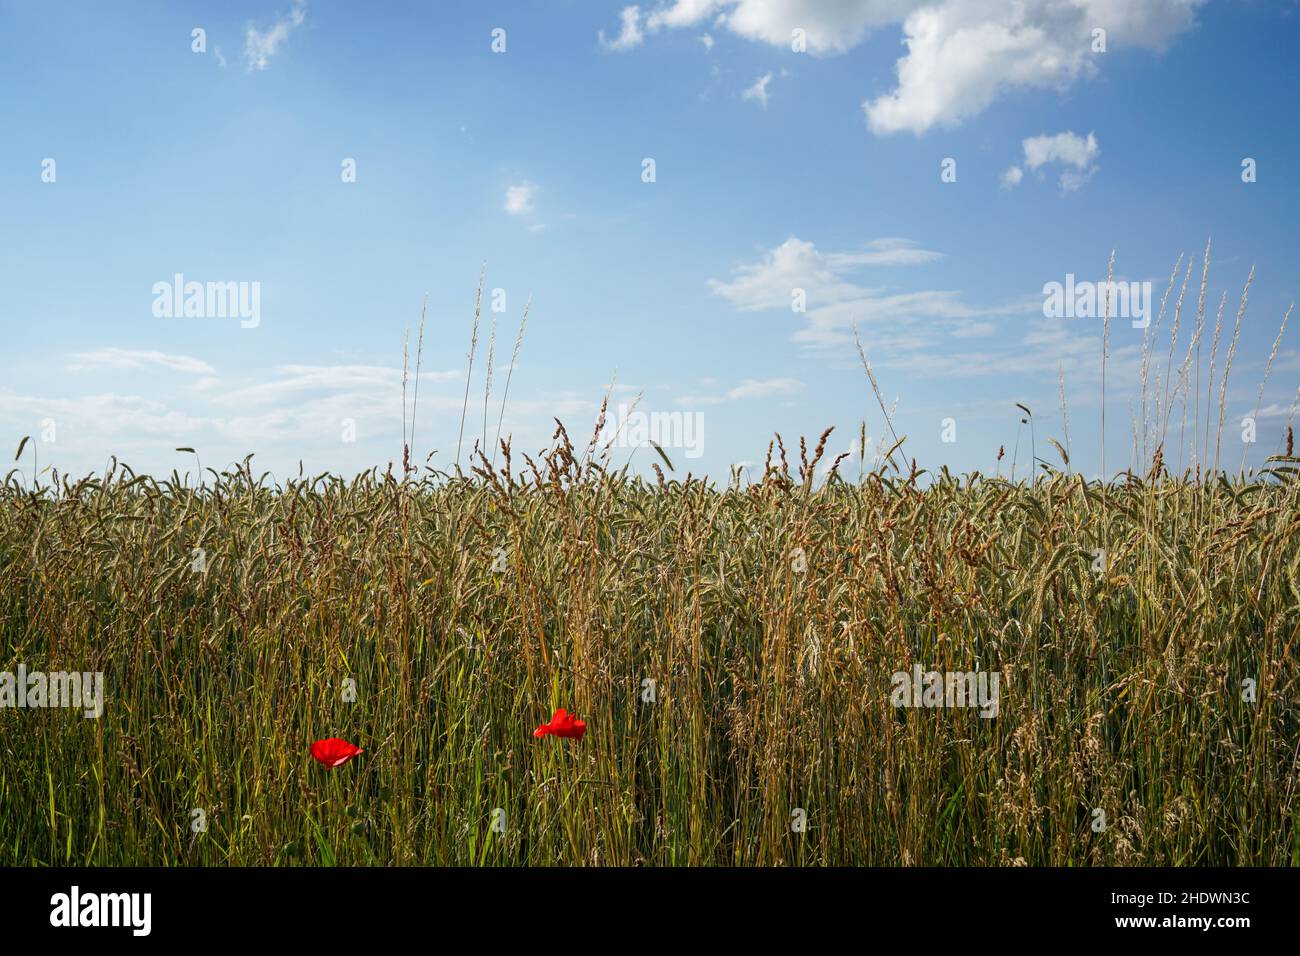 View of a wheat field with red poppy flowers on a sunny day Stock Photo